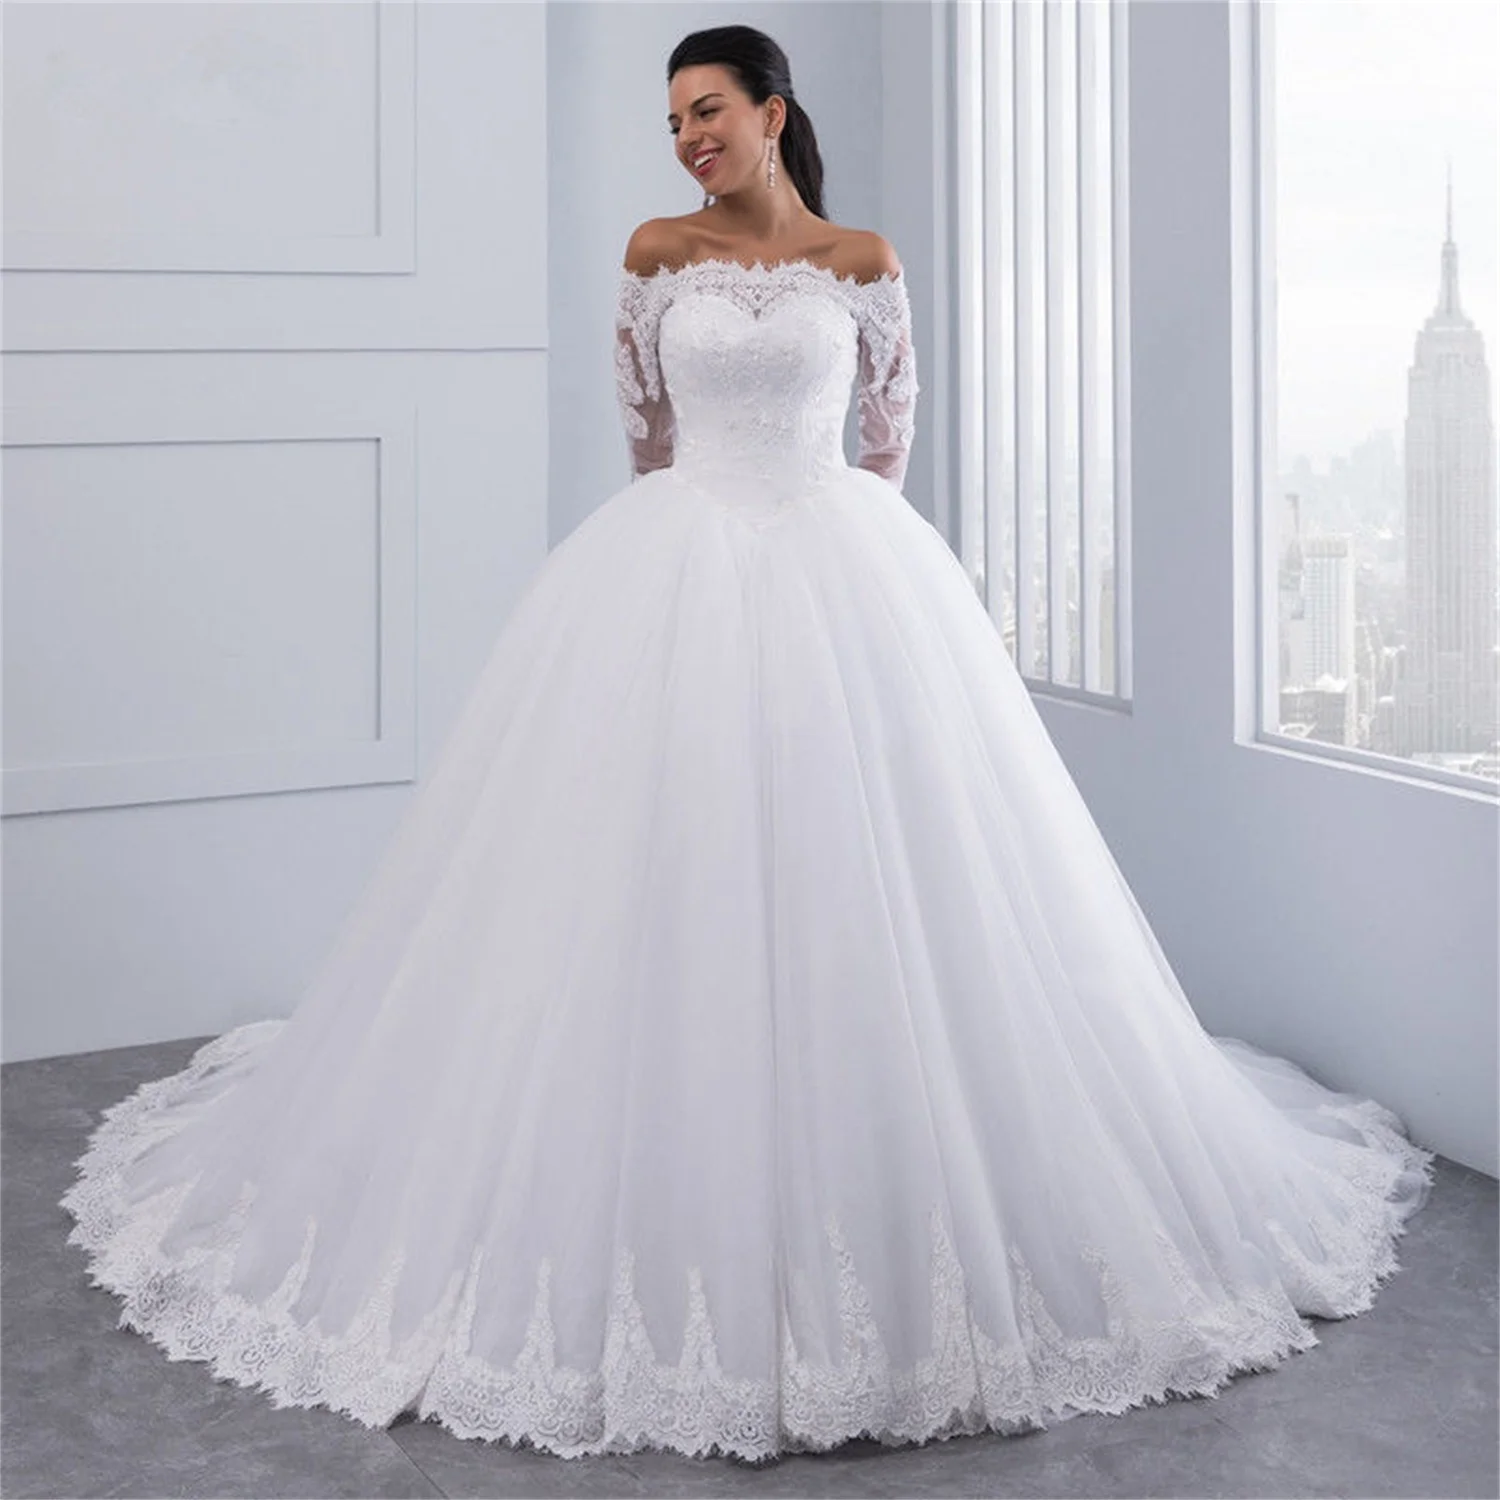 

Lace Bridal Dress 2023 Wedding Dresses Brides Wedding Dresses for the Church Weeding Dress Women2023 Bepeithy Official Store